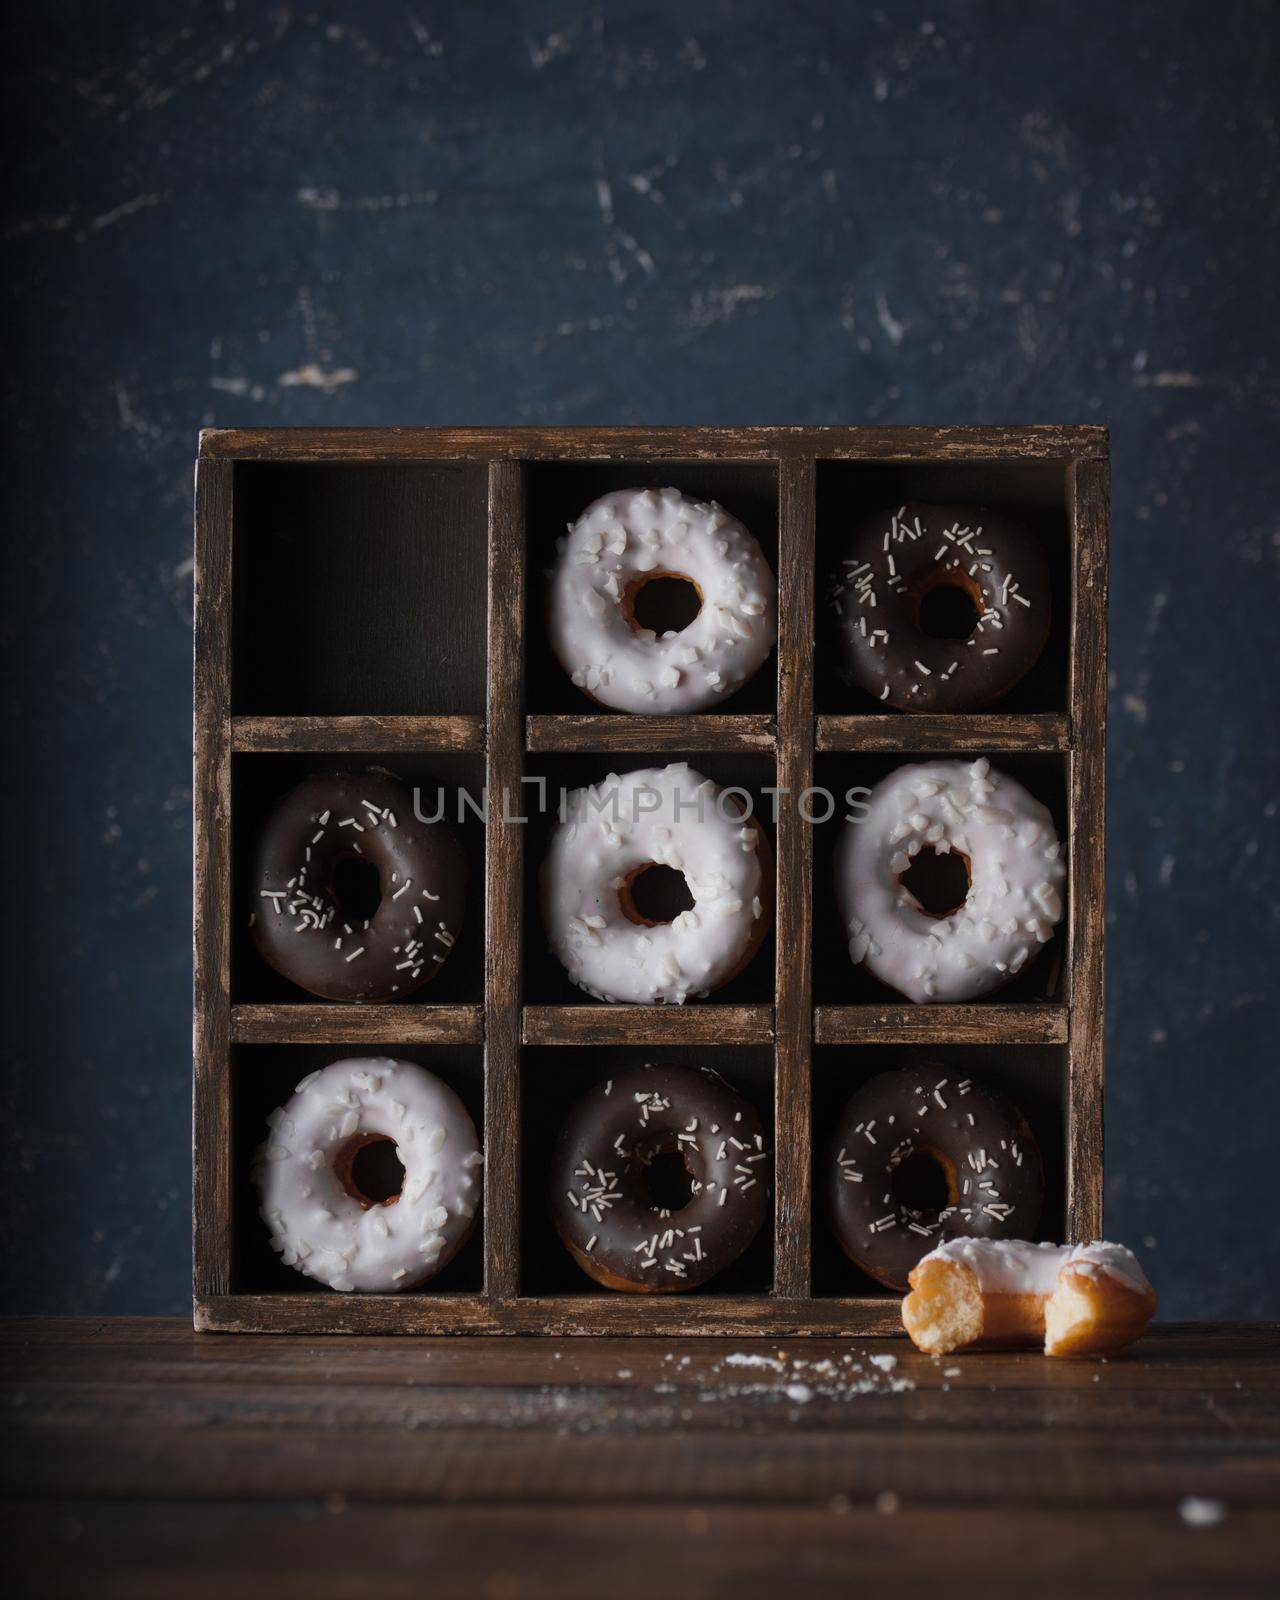 Donuts with dark and white chocolate on a dark background